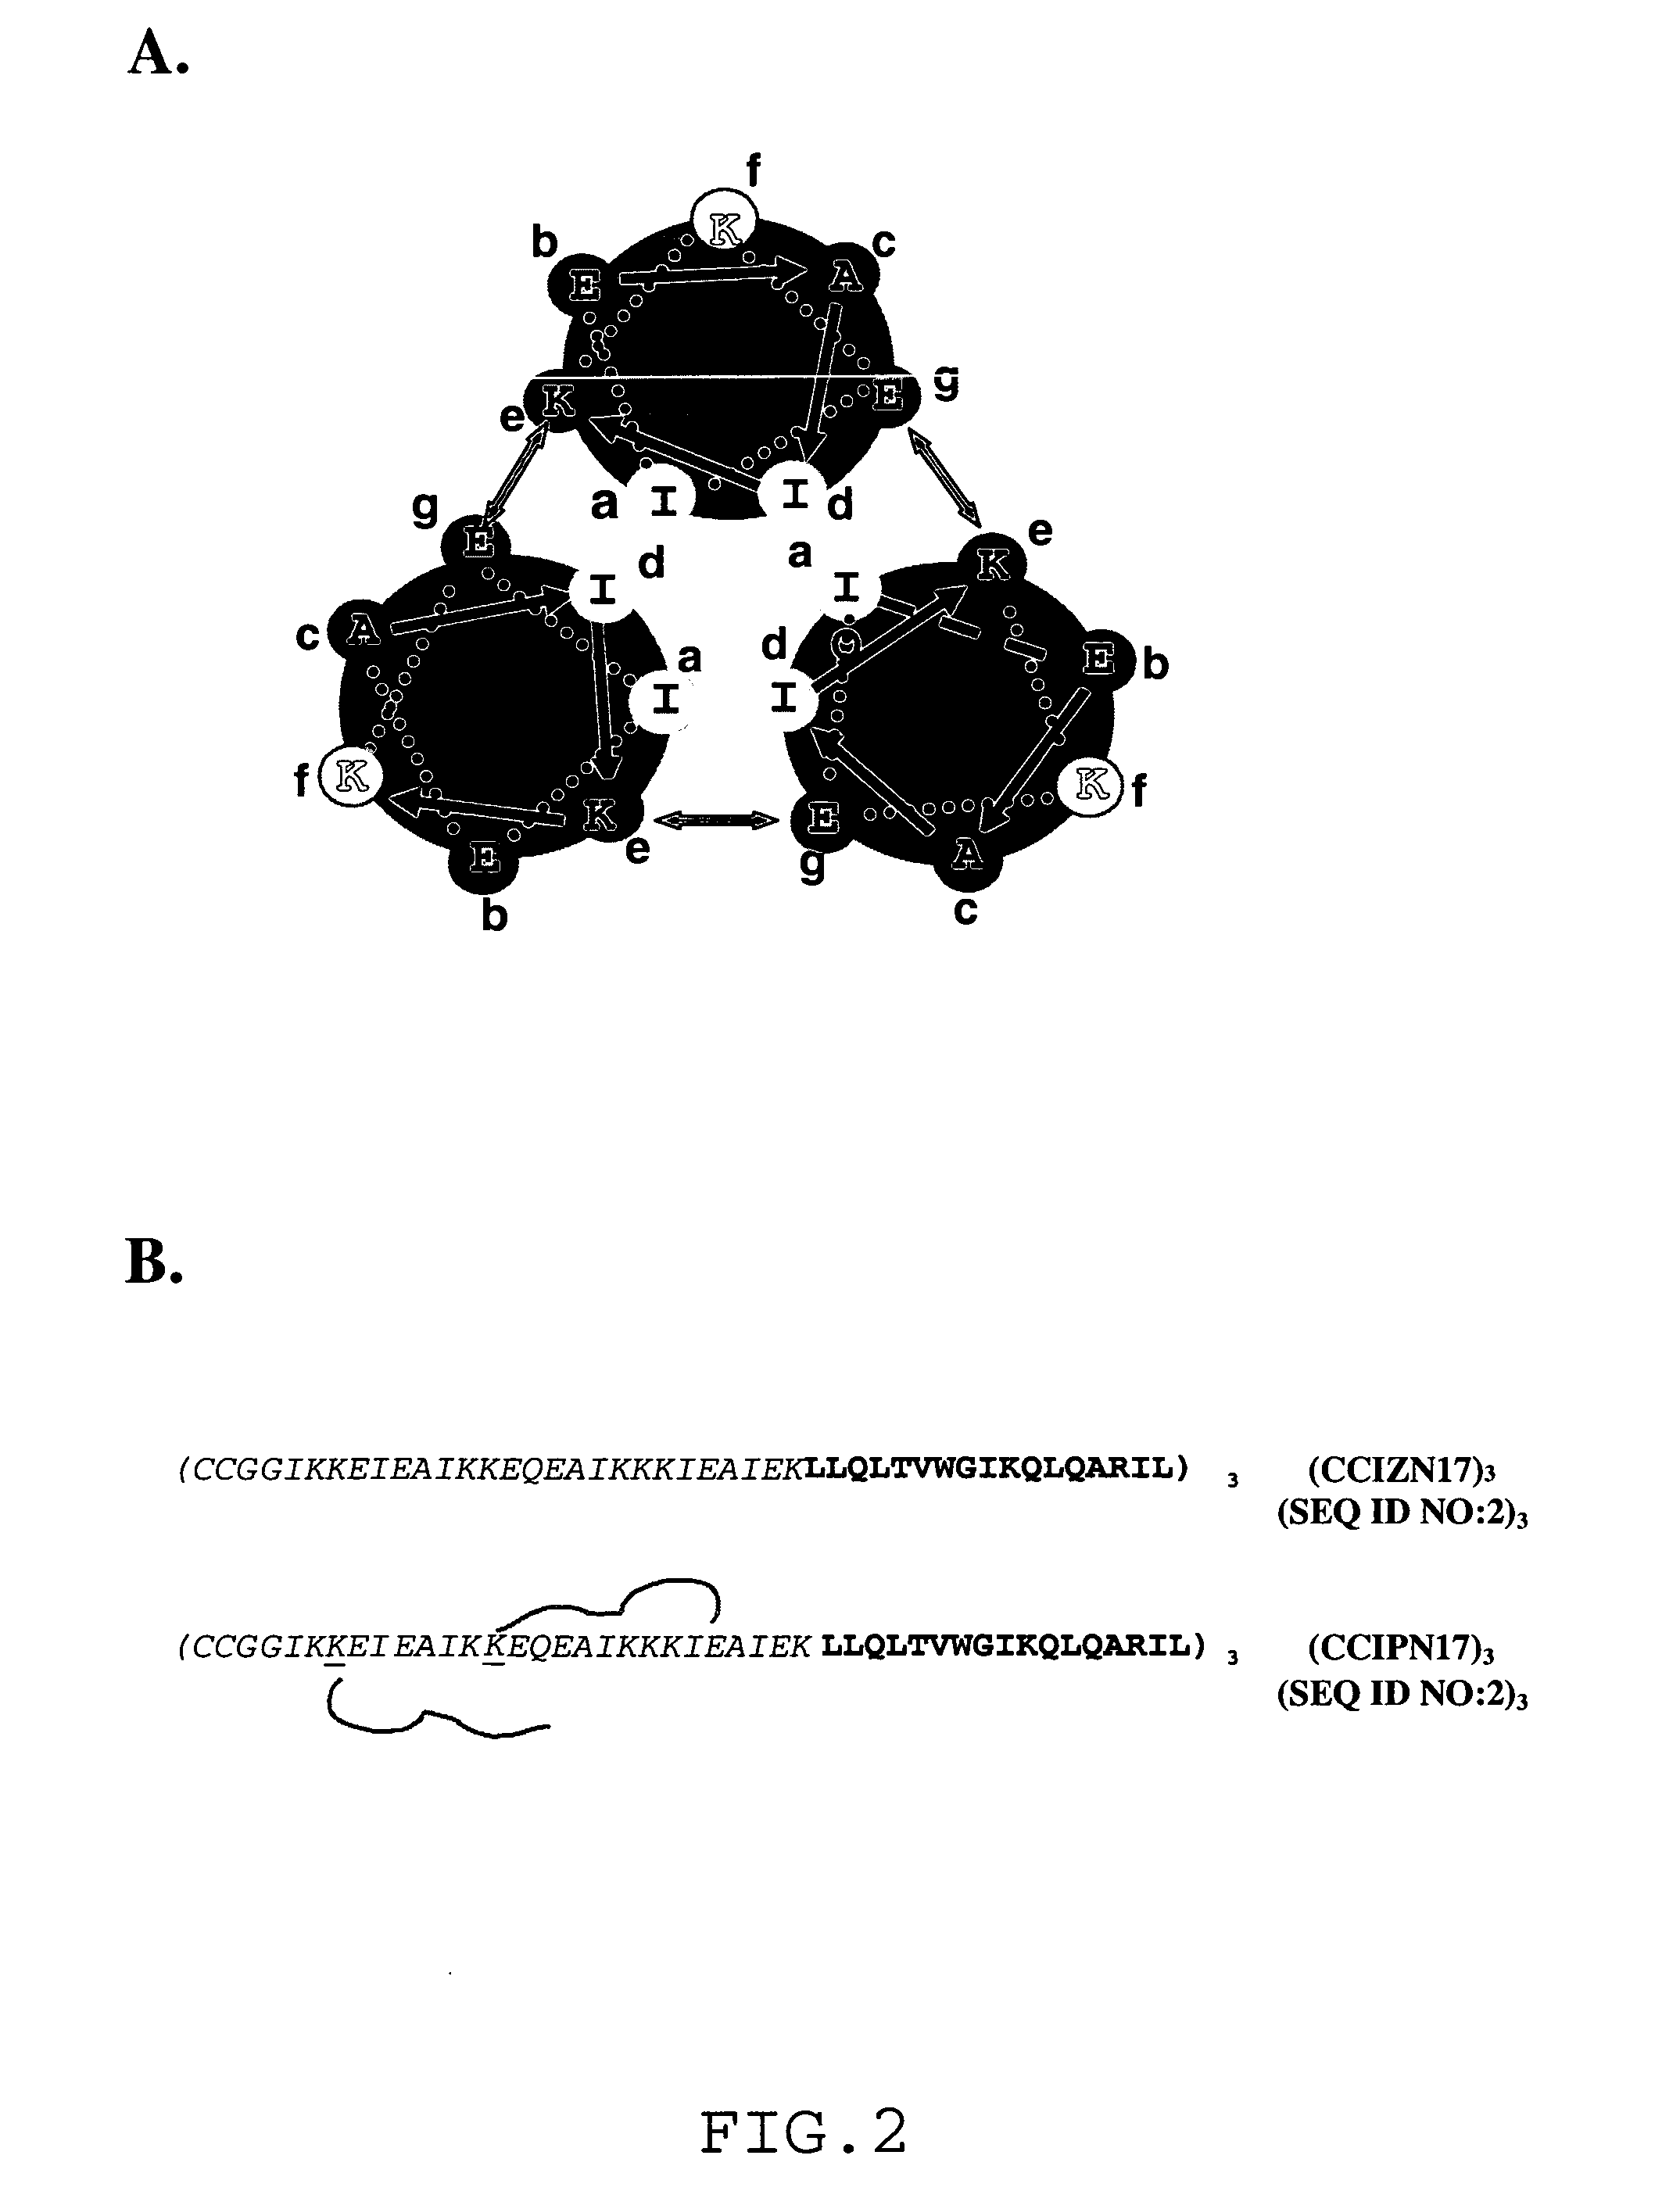 Method for Shielding Functional Sites or Epitopes on Proteins